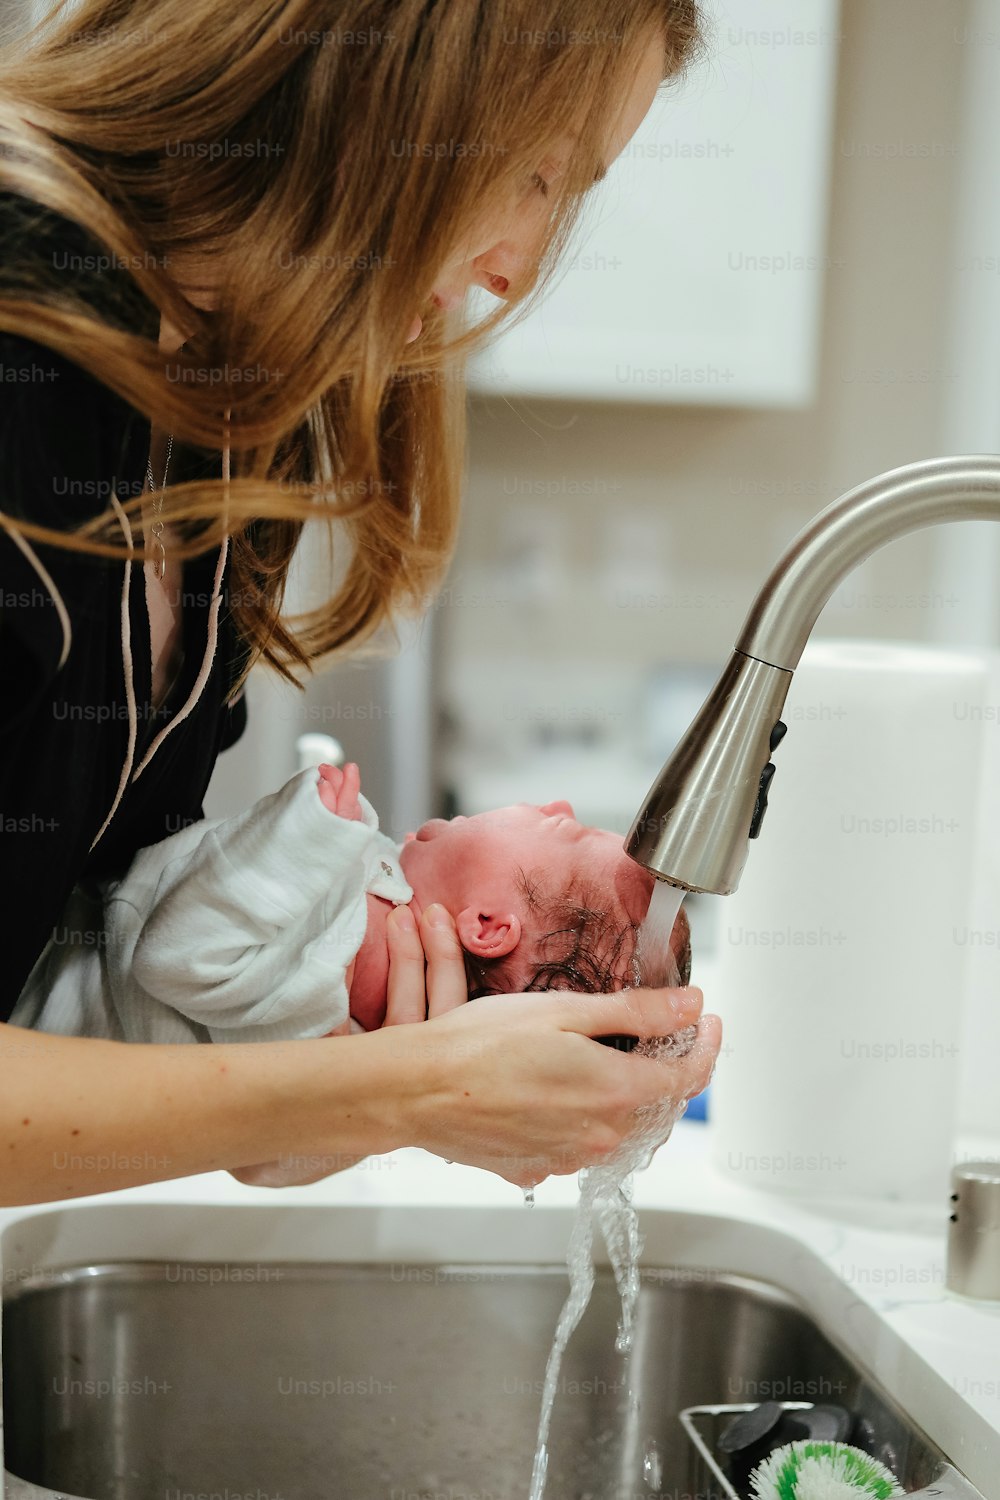 a woman washing a baby in a sink